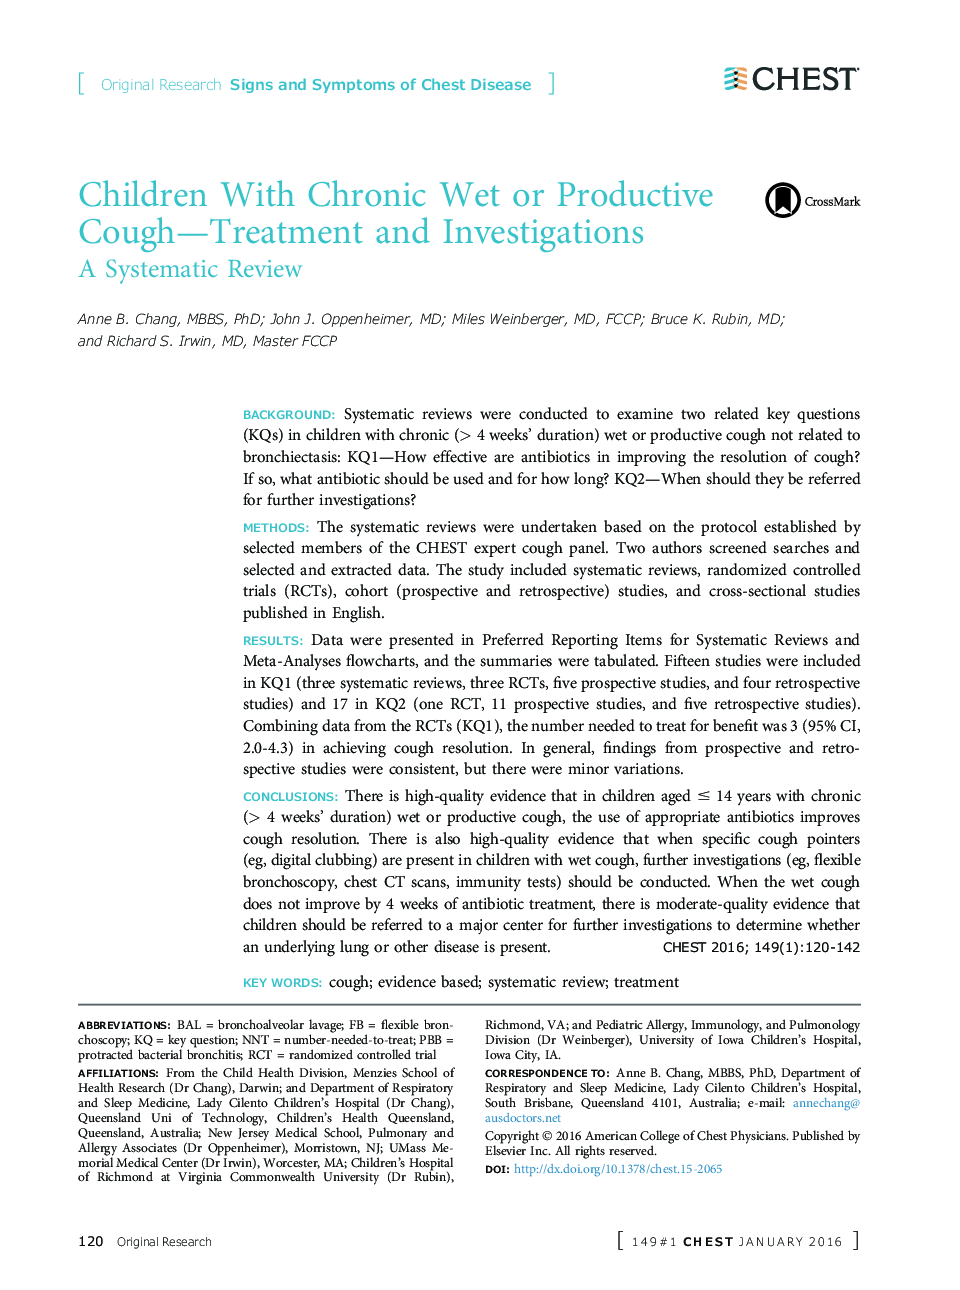 Children With Chronic Wet or Productive Cough-Treatment and Investigations